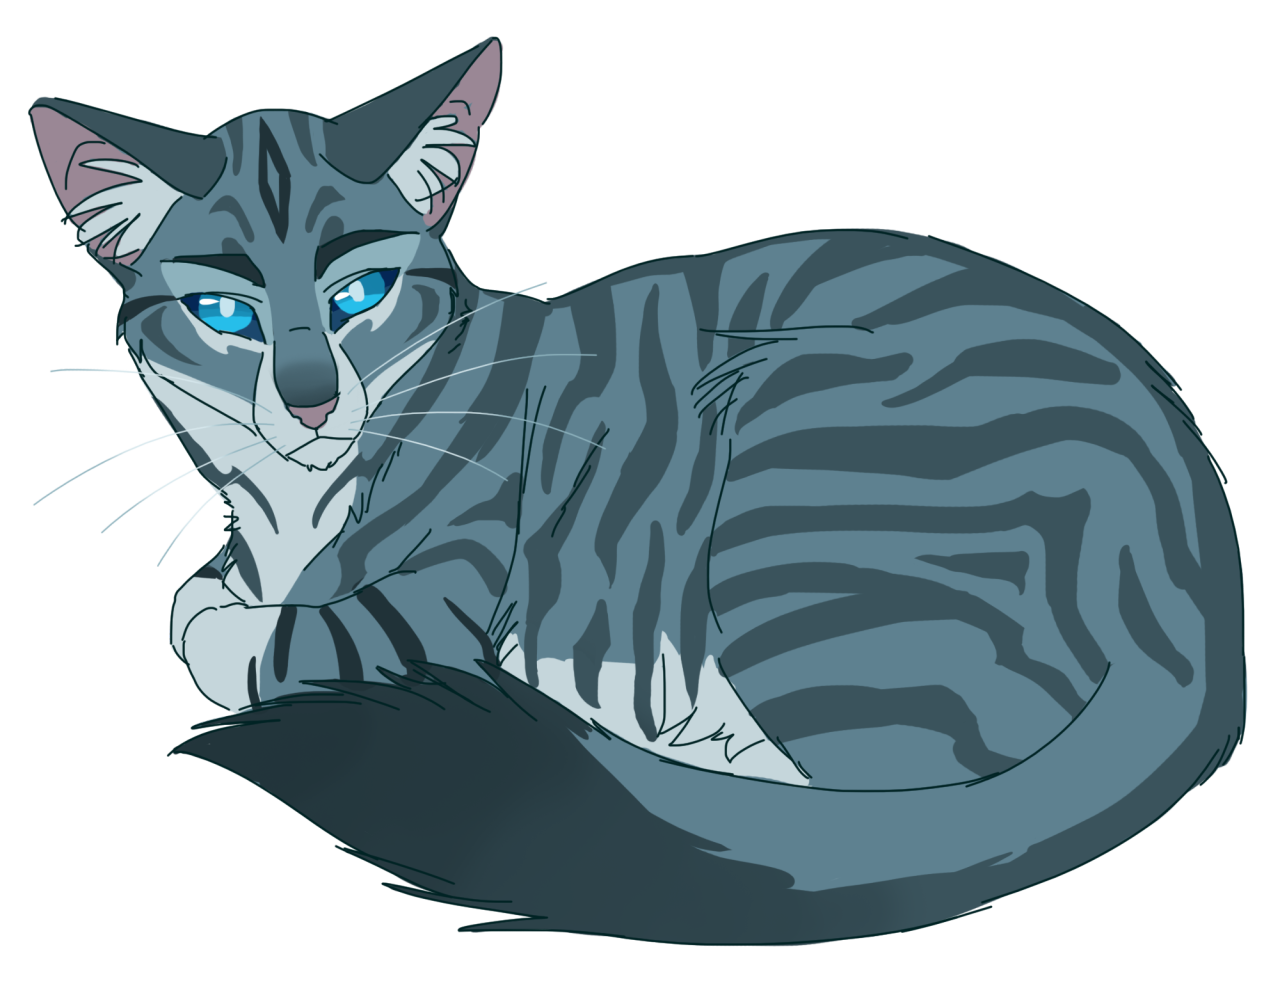 100 Warrior Cats Challenge #14: Jayfeather
(Feel free to use my designs. Credit is appreciated)